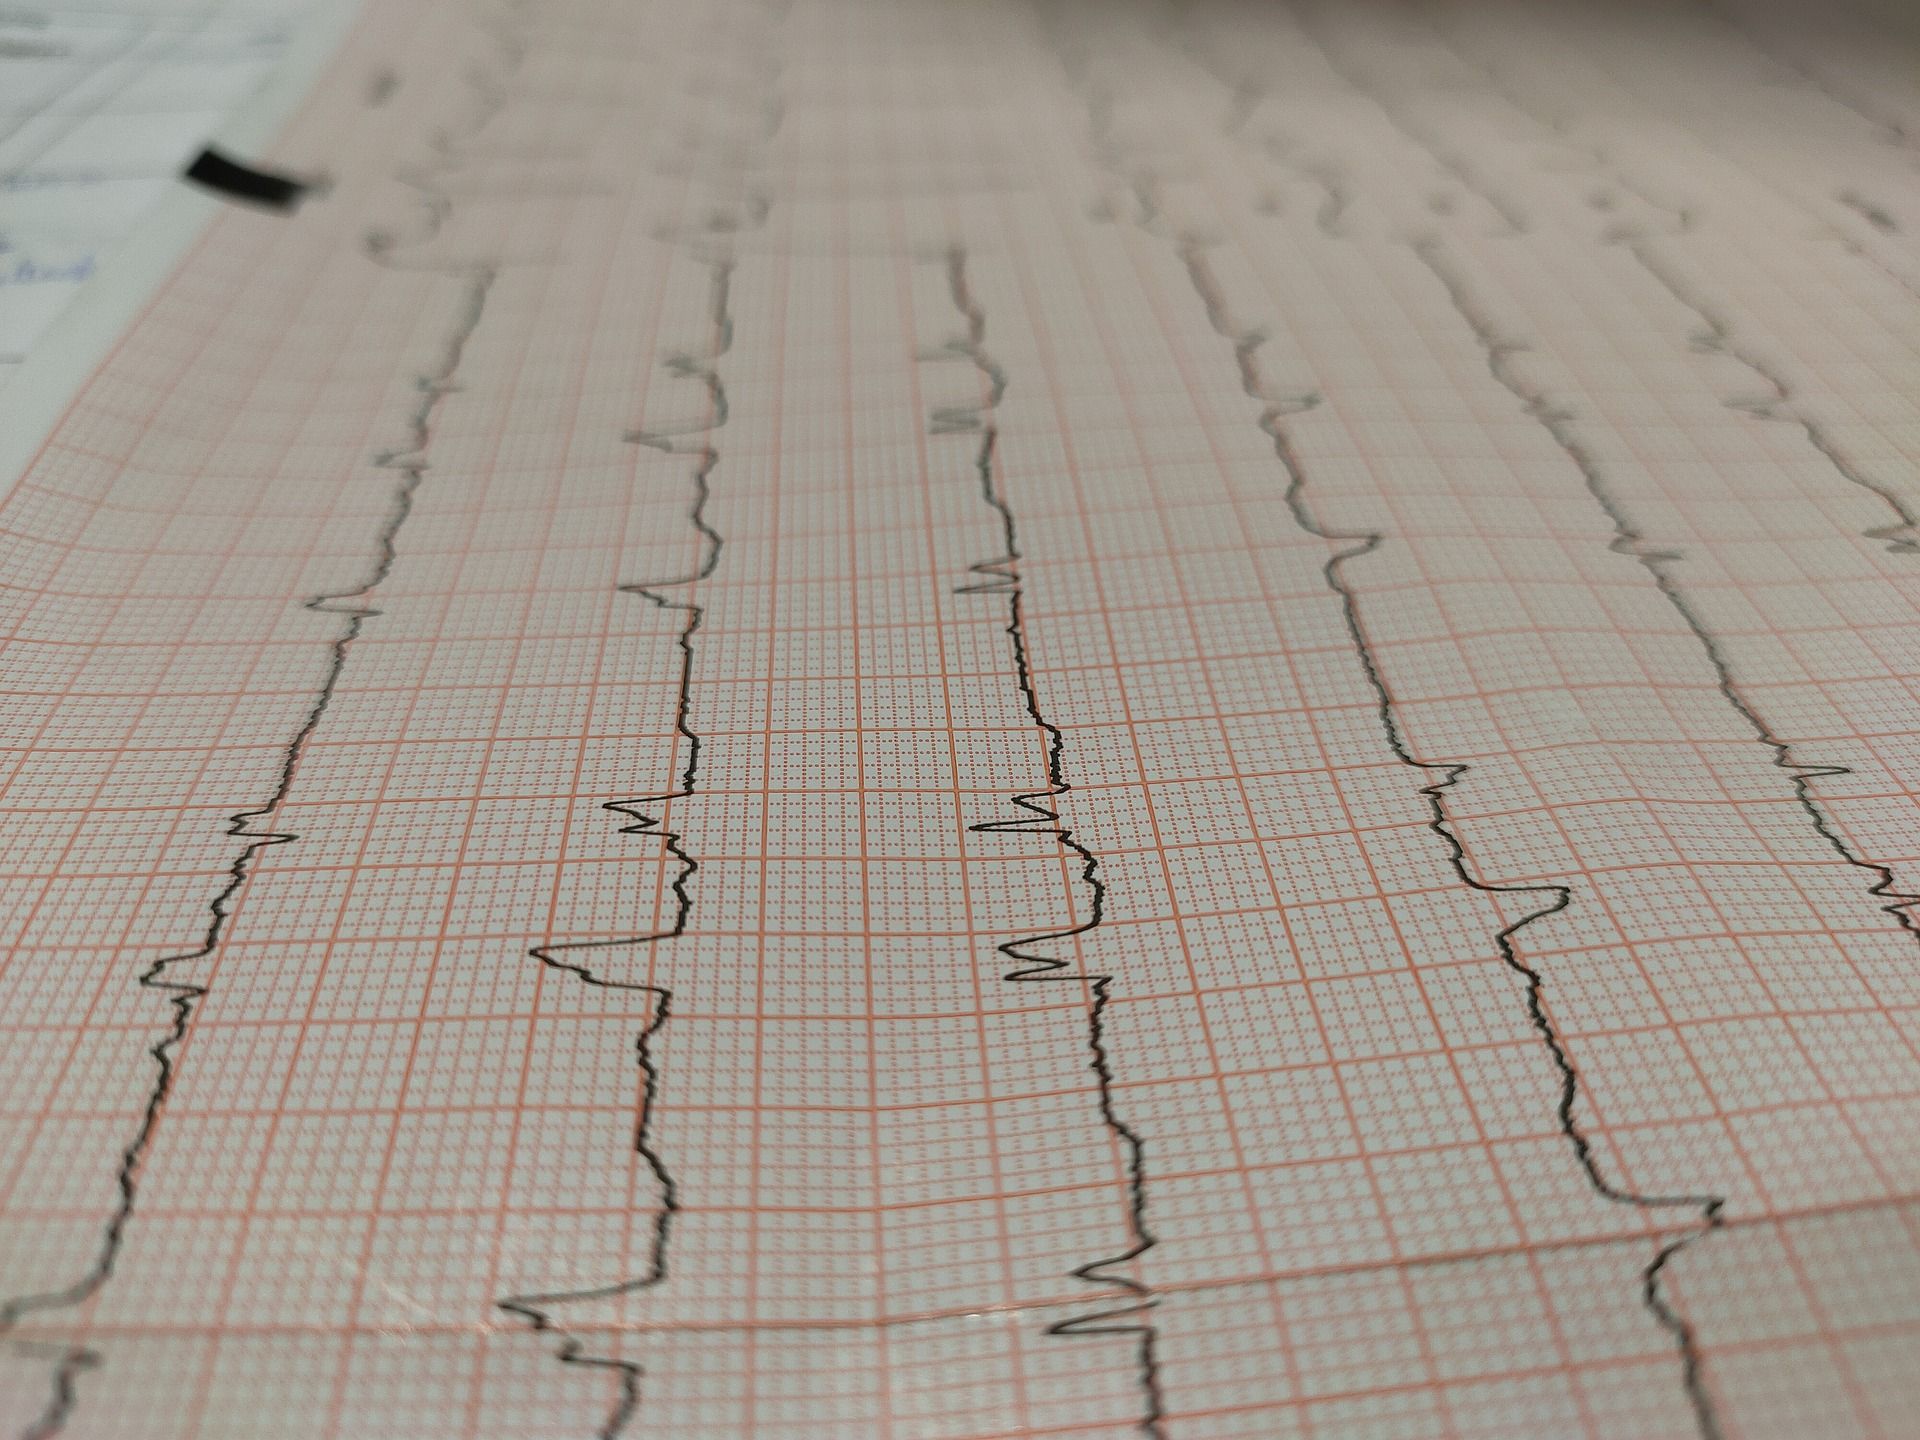 An electrocardiogram reading on a piece of paper